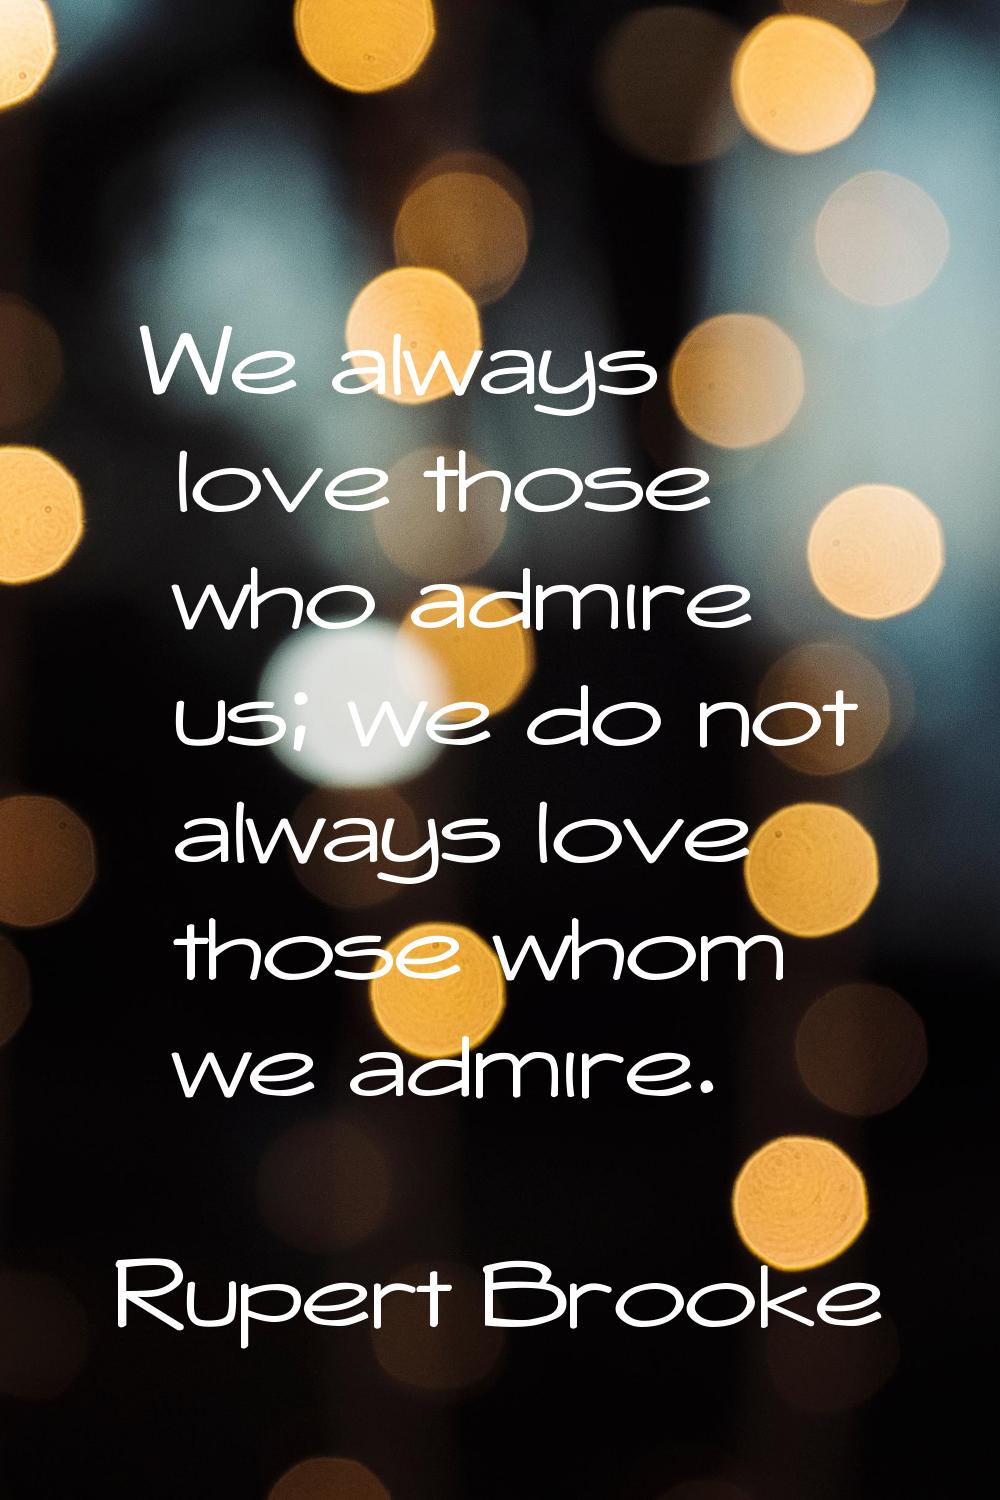 We always love those who admire us; we do not always love those whom we admire.